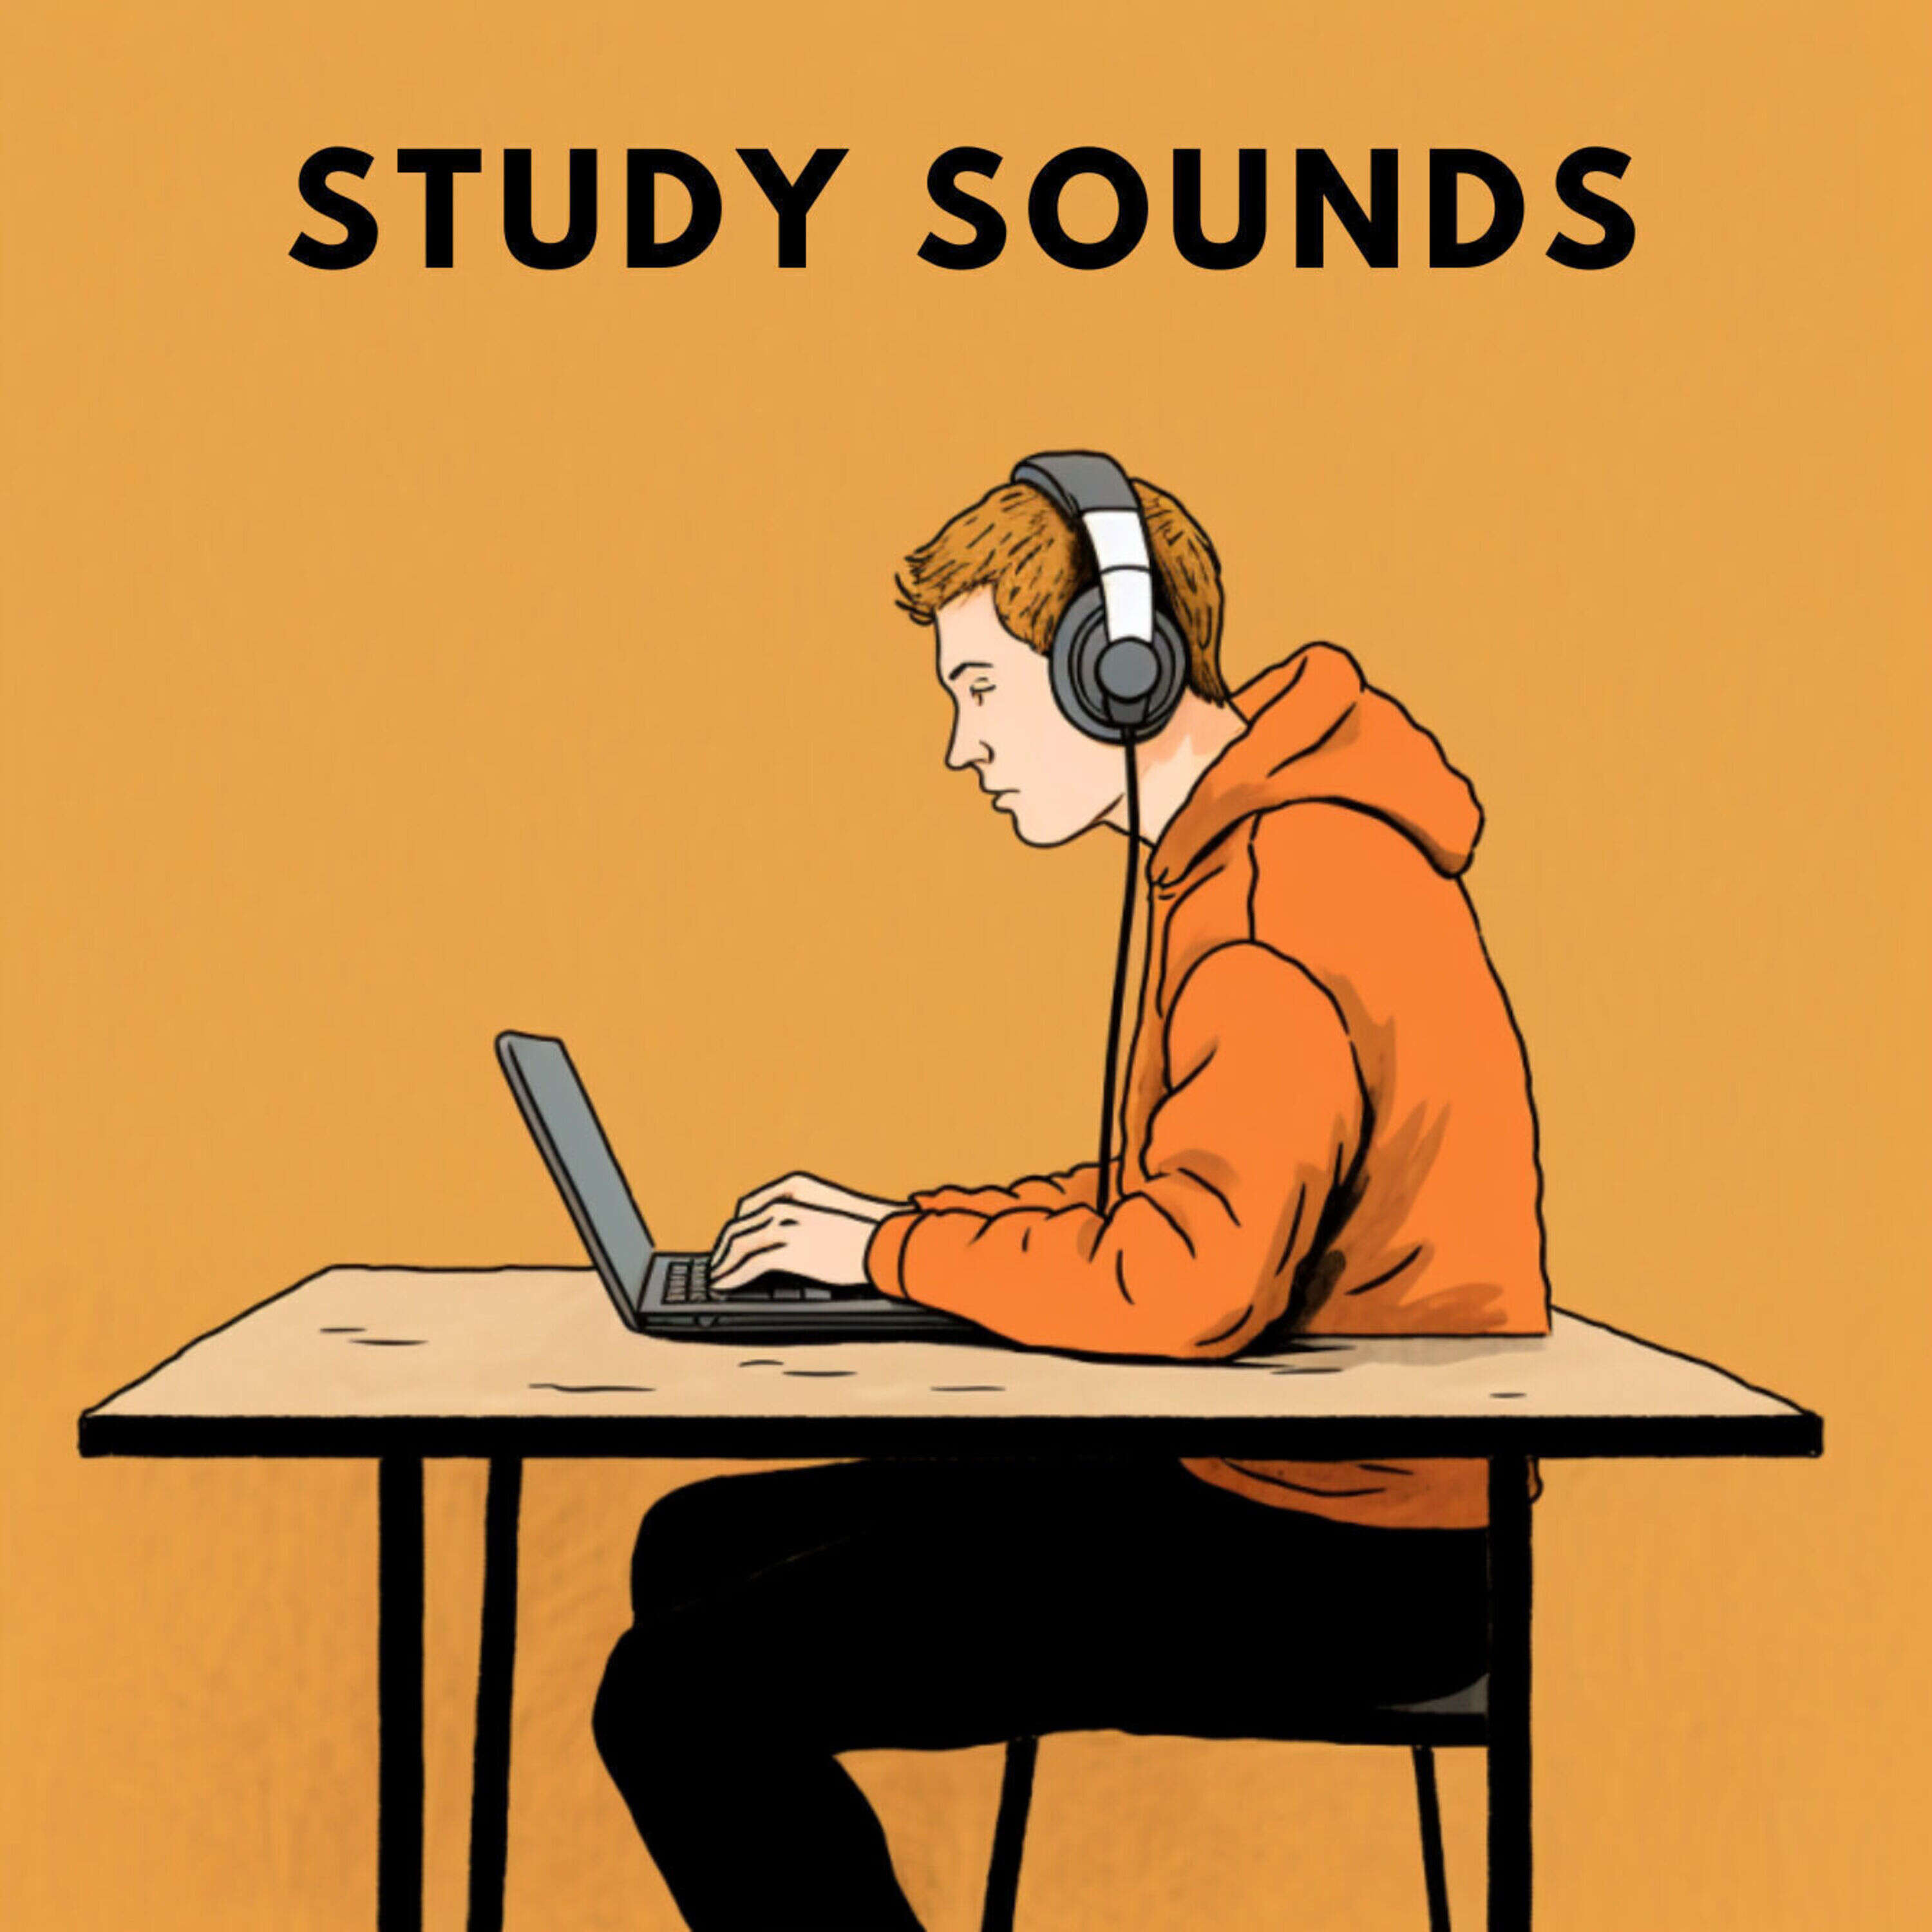 Study sounds Project - Rain Has Gone (sounds for Studying)